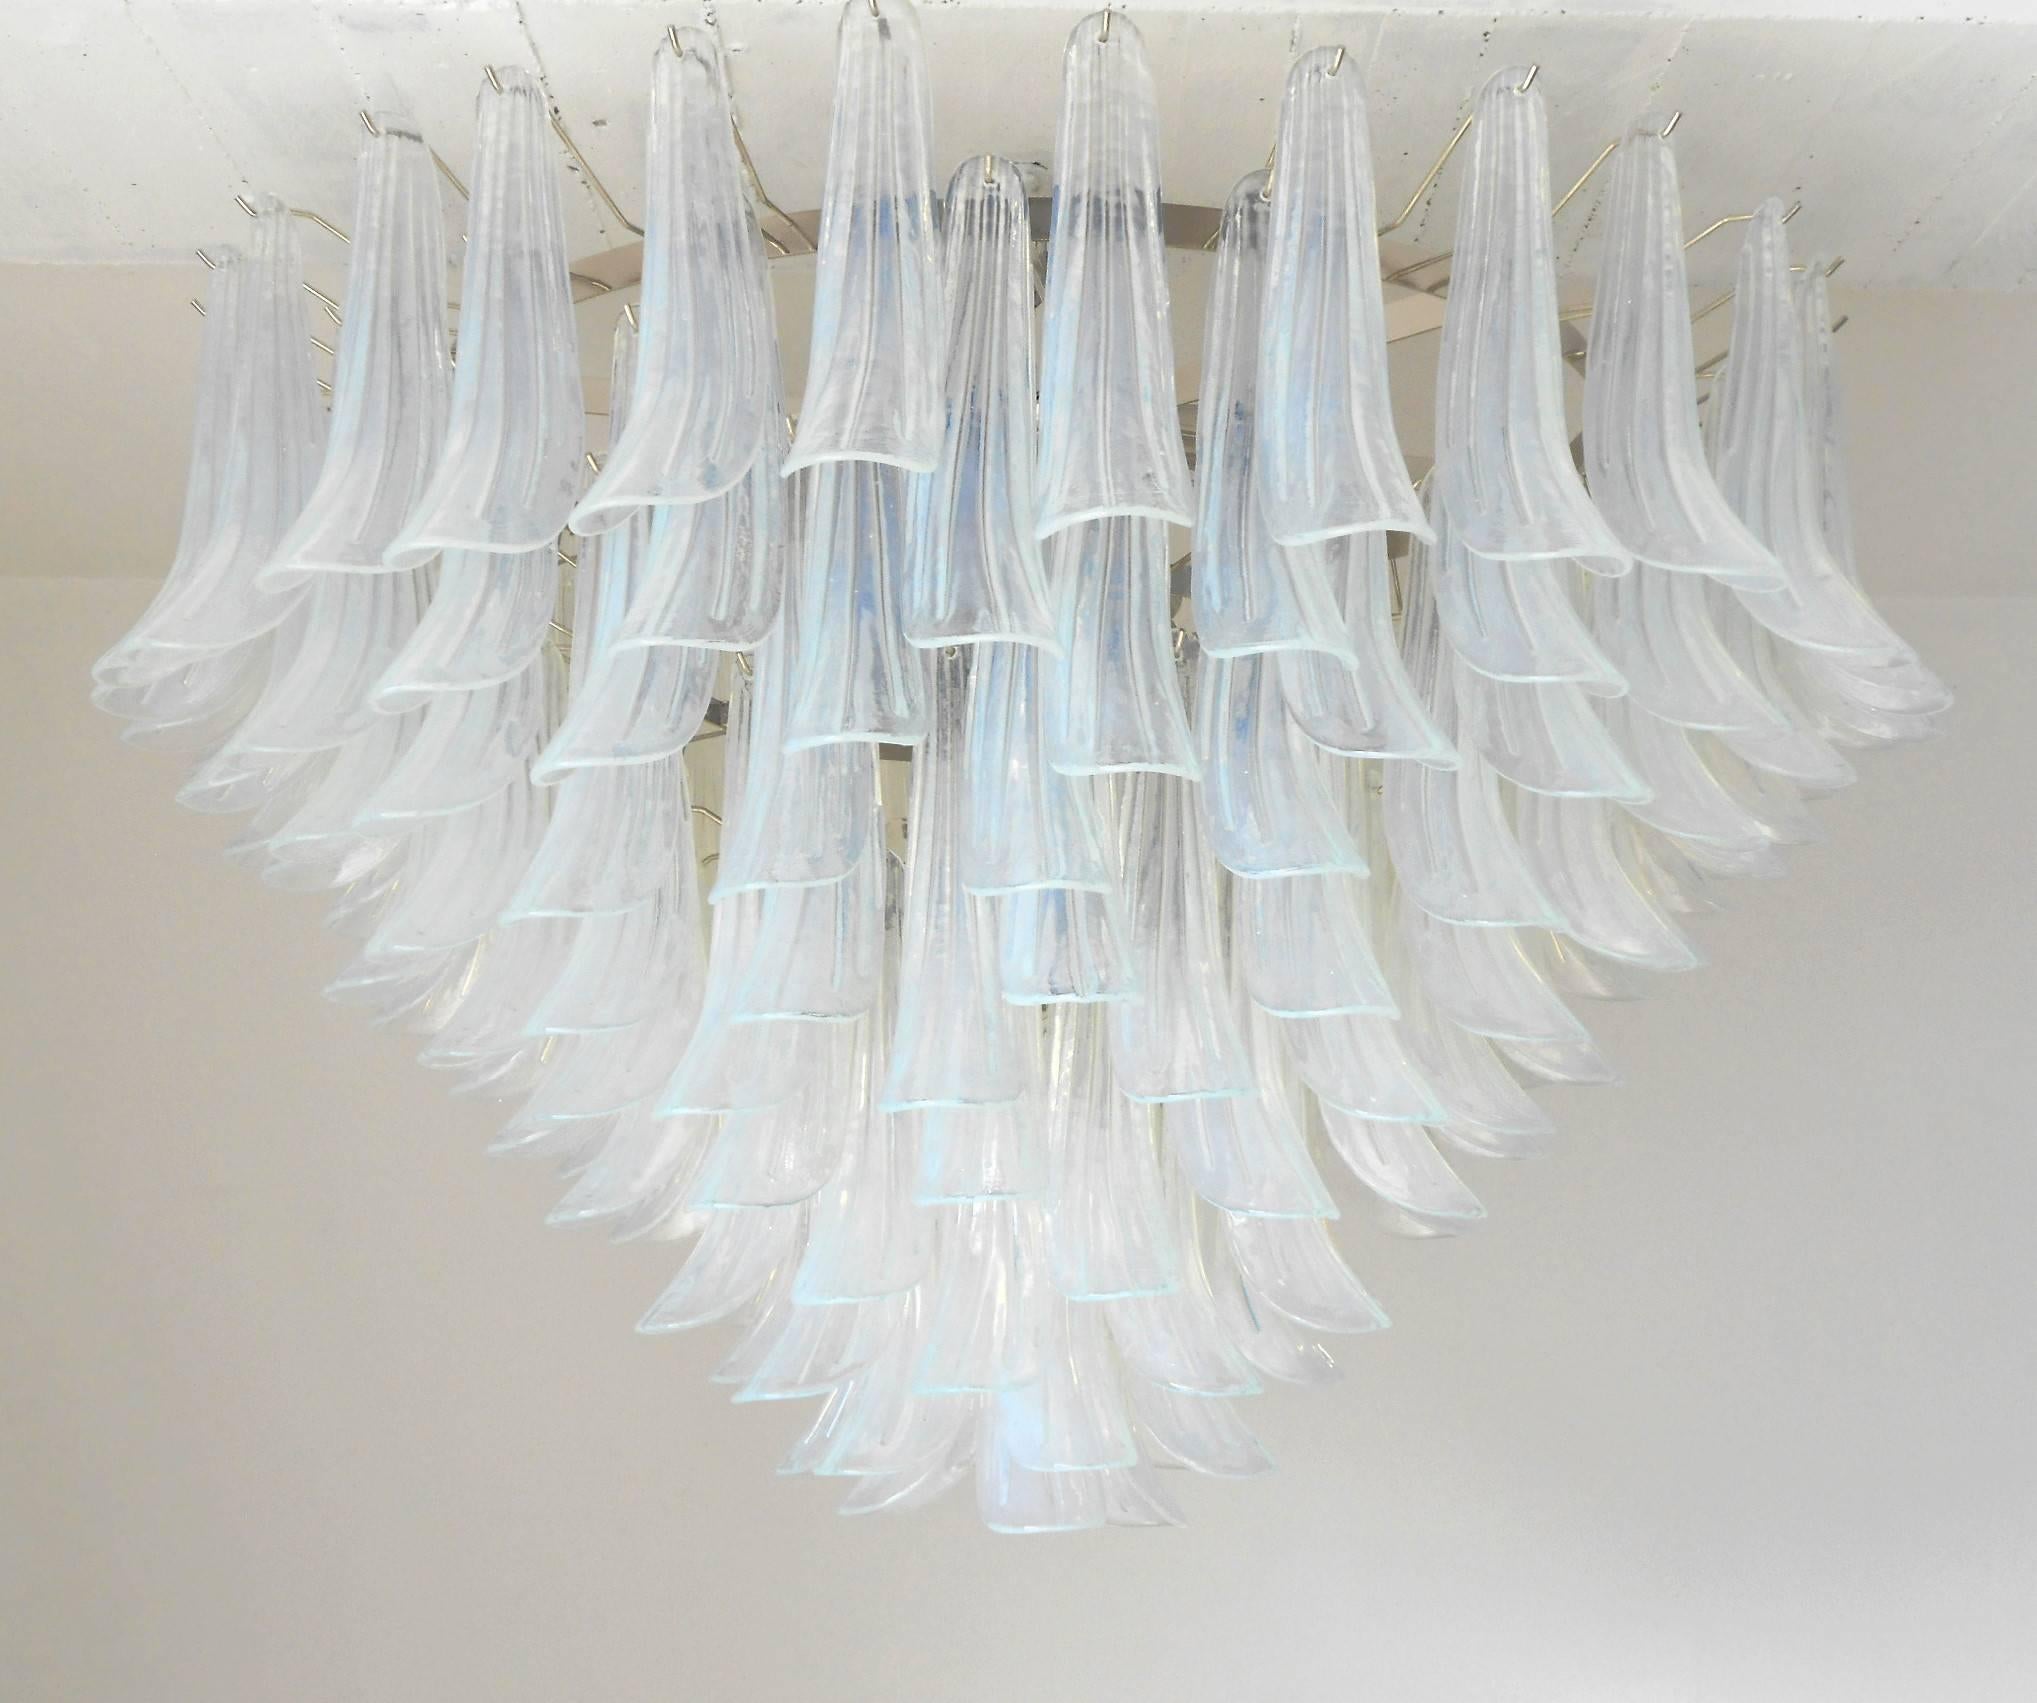 Italian chandelier with opaline Murano glasses hand blown into beautiful small saddles or leaves, mounted on nickel frame by Fabio Ltd / Made in Italy
21 lights / E26 or E27 type / max 60W each
Diameter: 47 inches / Height: 32 inches plus chain and